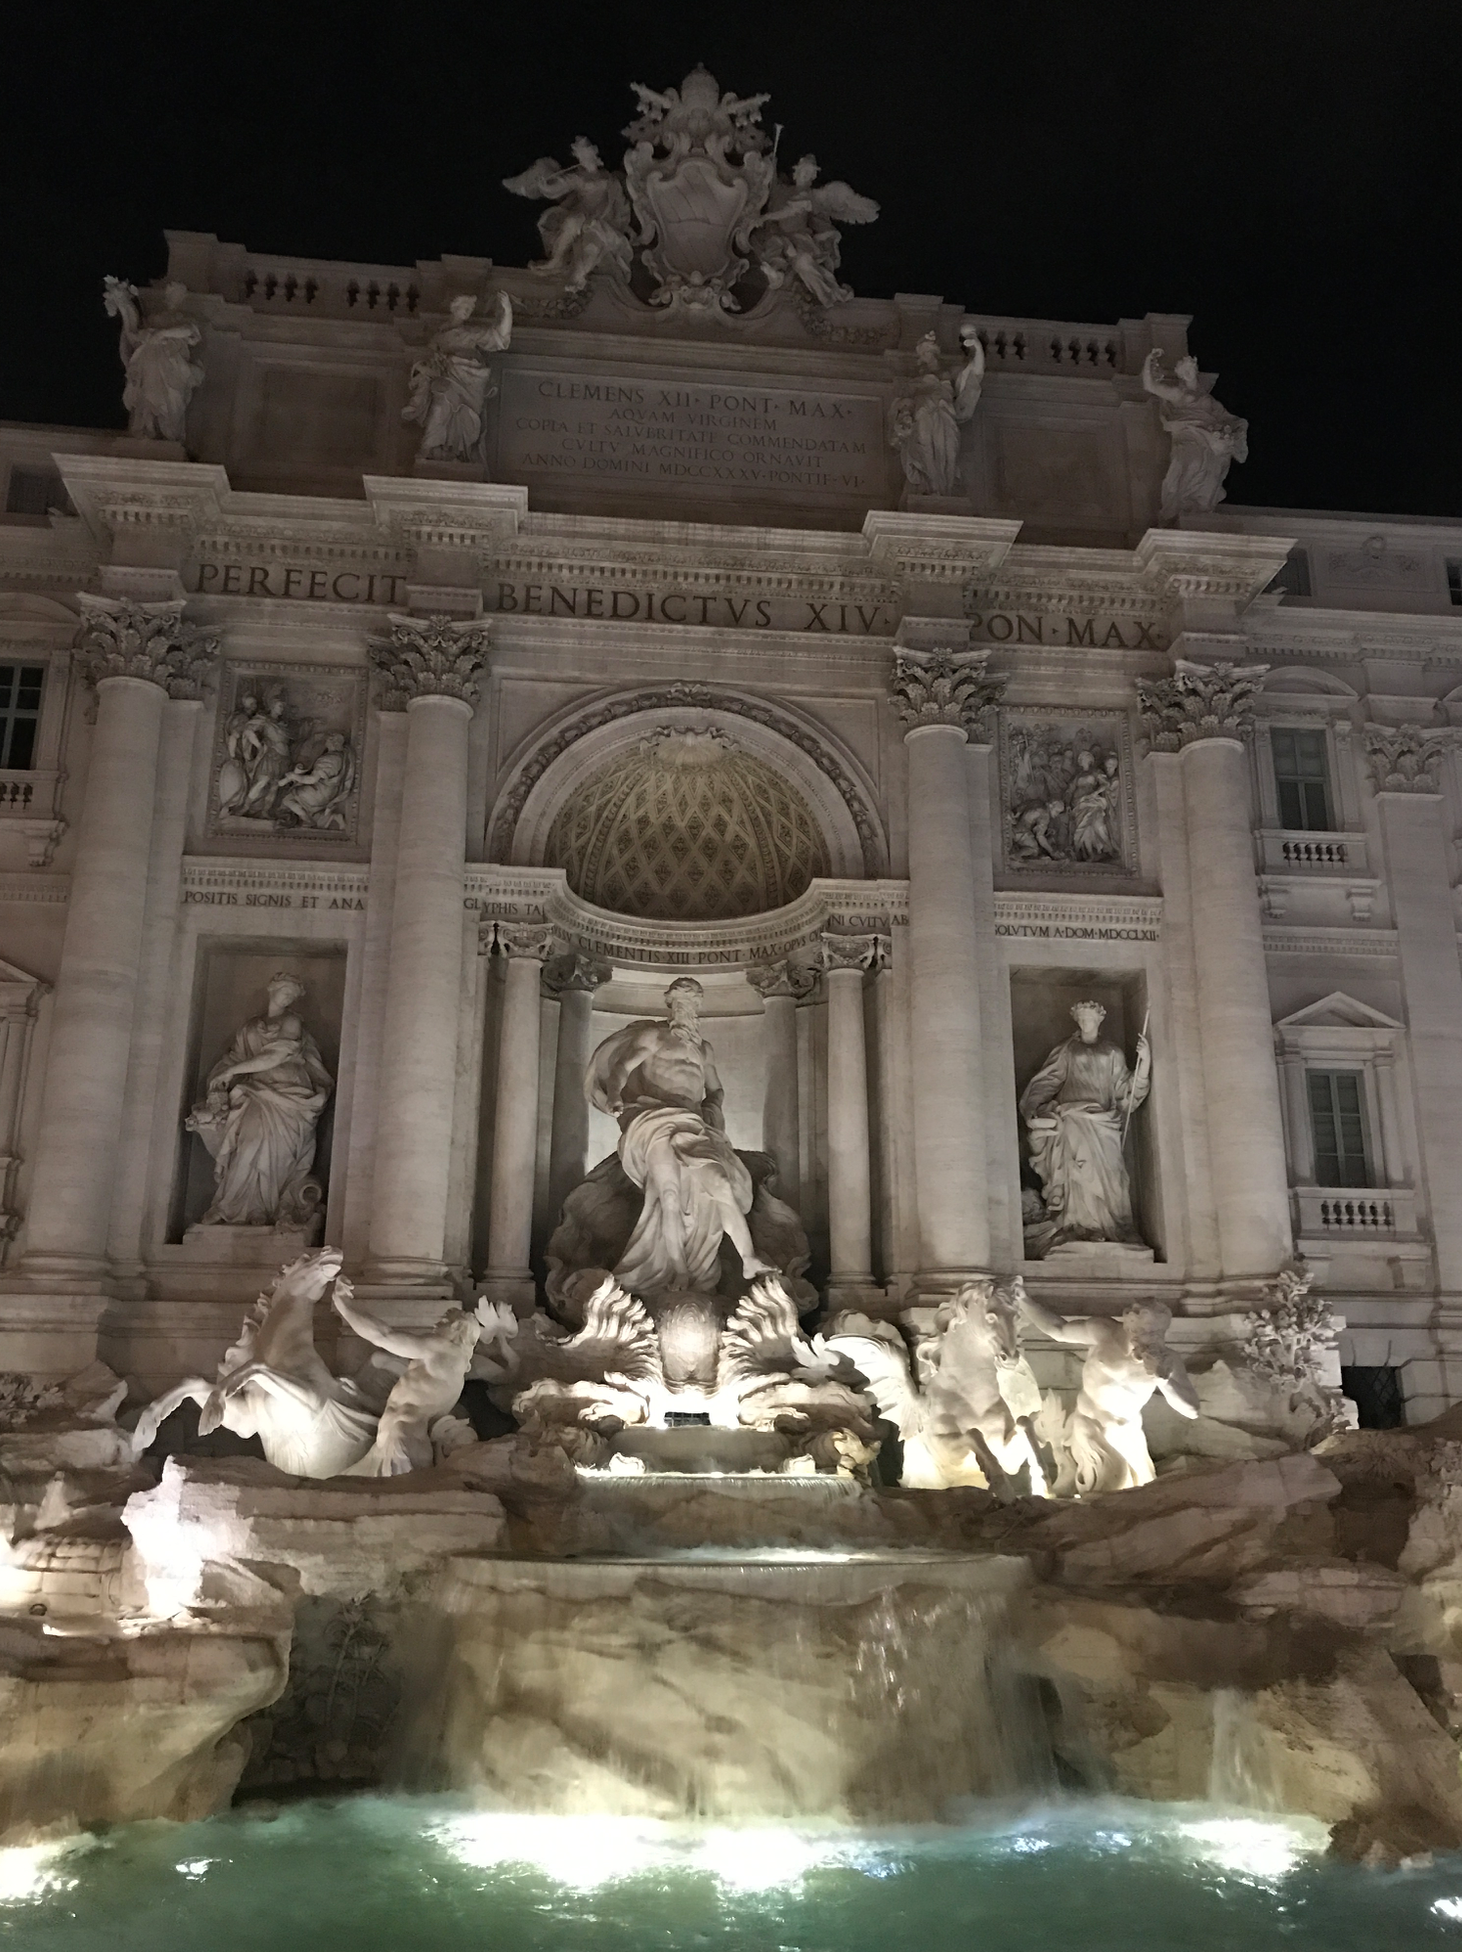 2 Days In Rome - What to do in Rome - Rome Italy - Rome Itinerary - Italy Itinerary - Rome Hotels - Travel to Rome - What to wear in Rome - Rome Hotels - Rome Tips - Visiting the Vatican - Colosseum - Trevi Fountain - Rome Photography - Travel Blog - Communikait by Kait Hanson